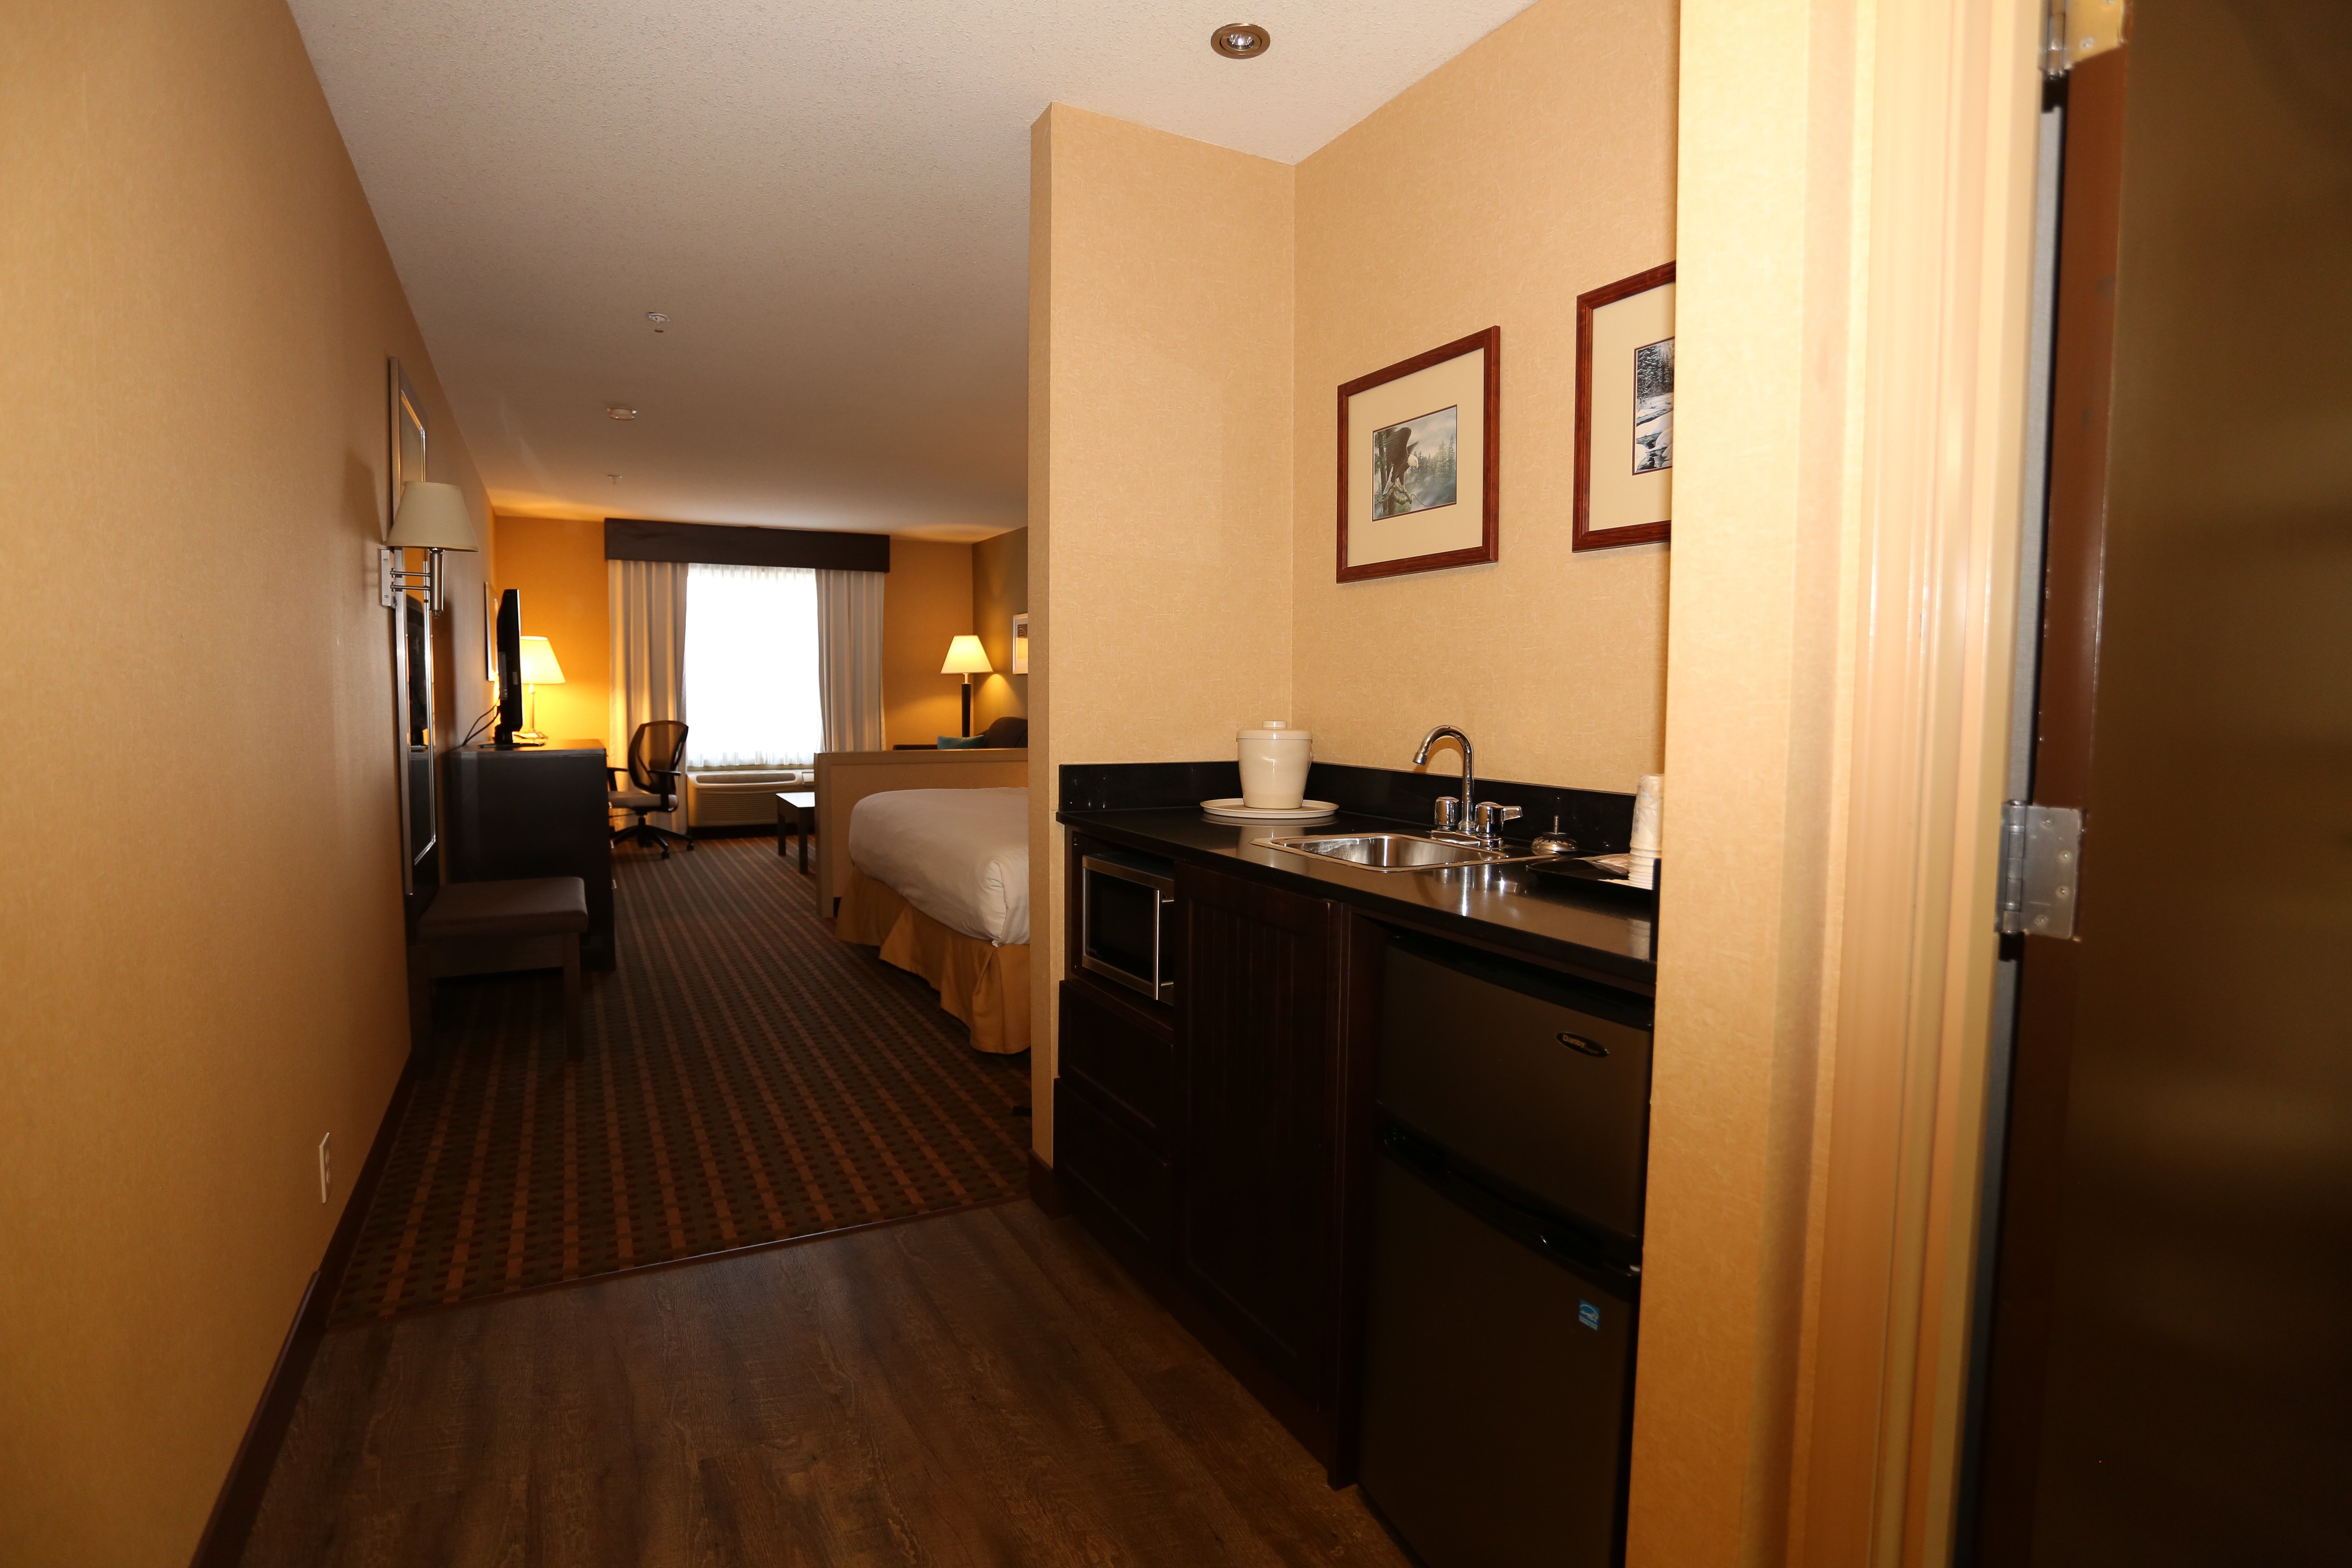 King Executive Room Including Wet Bar with Fridge and Microwave